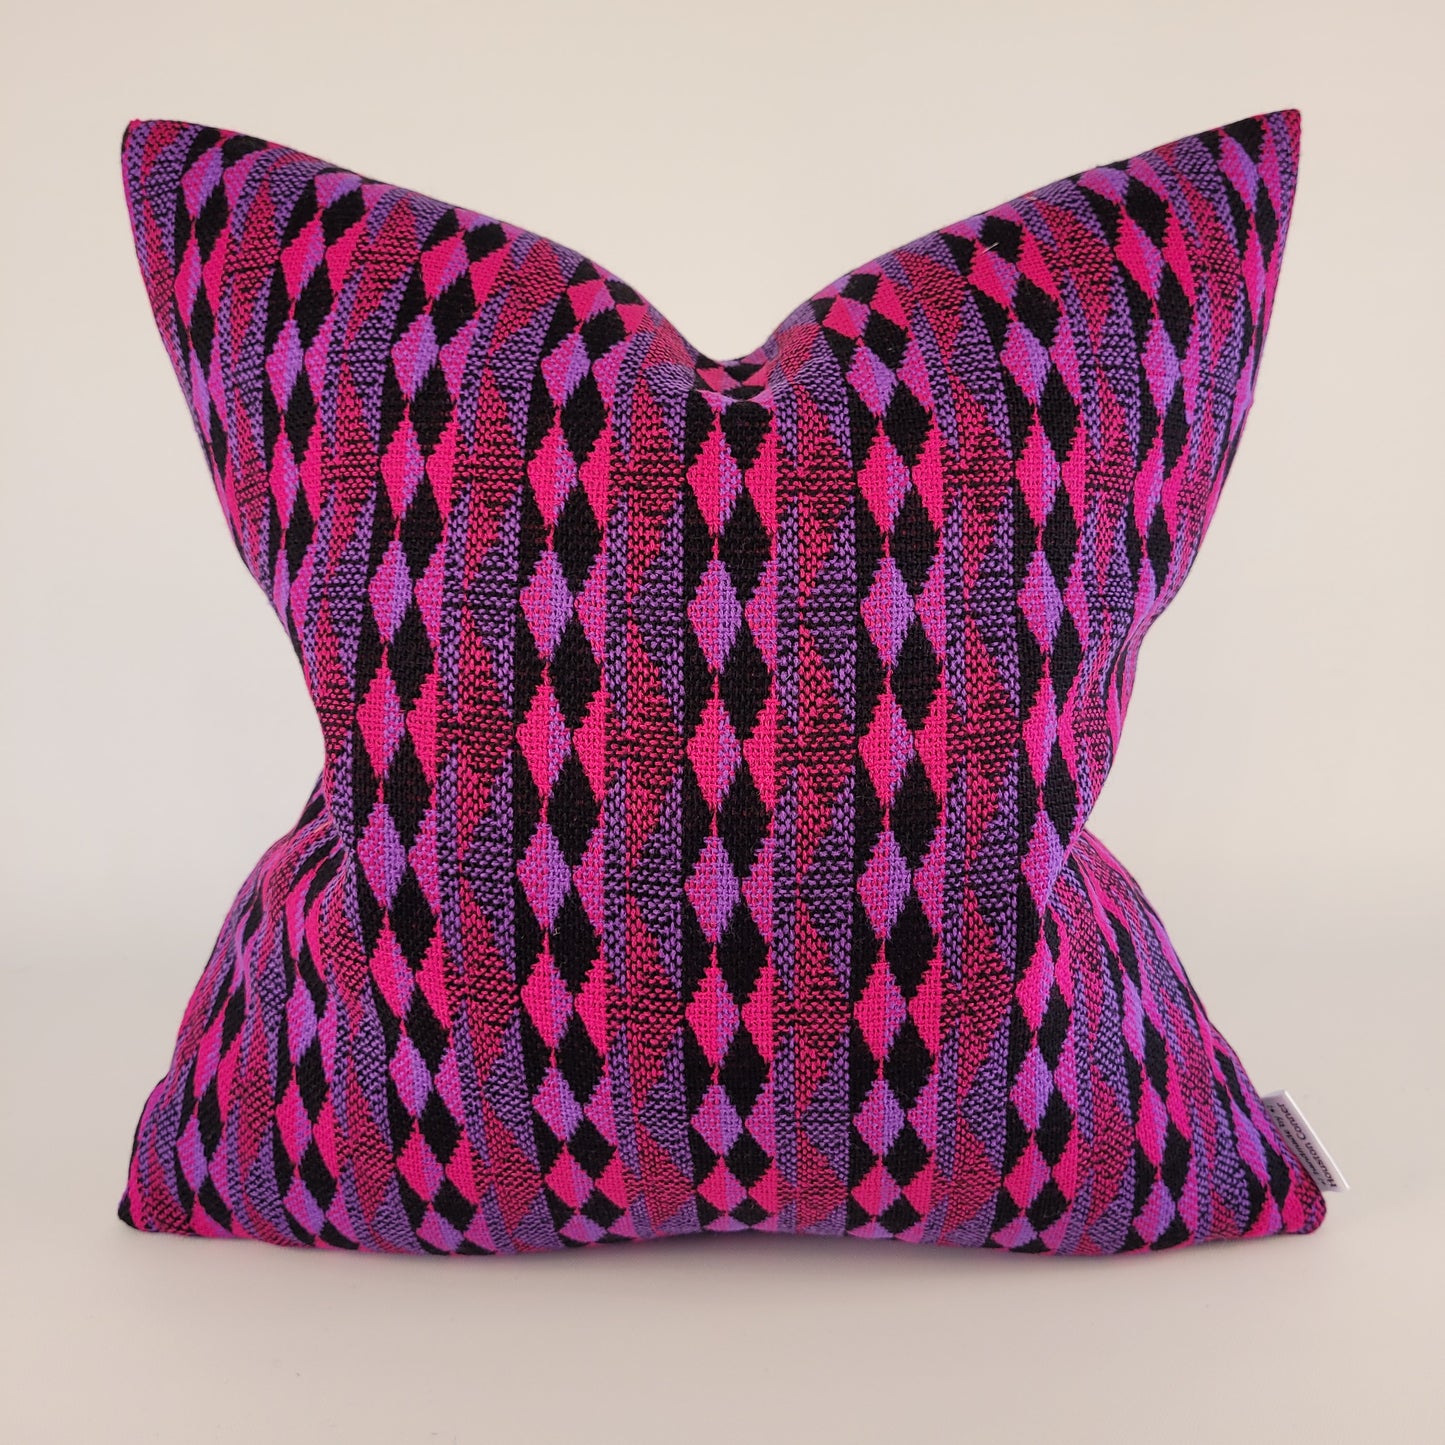 Vintage 1960s Hot Pink, Purple and Black Geometric Pillow 18"